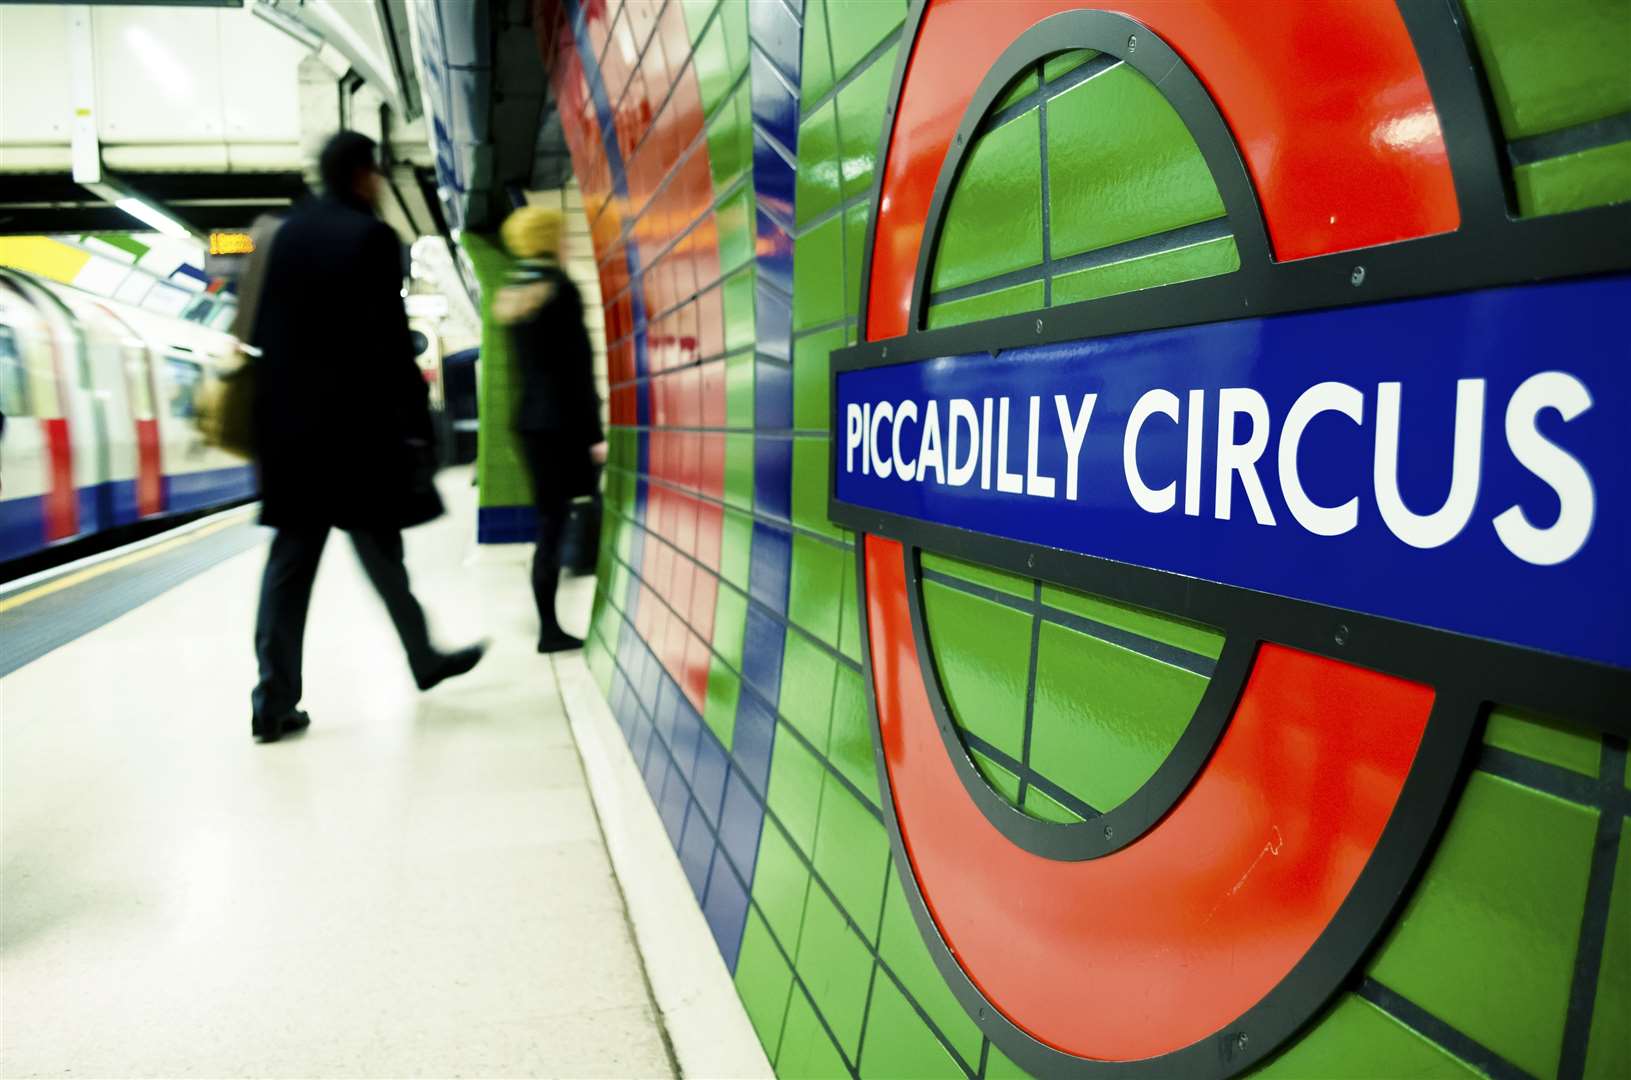 There is expected to be major disruption to London Underground on Thursday